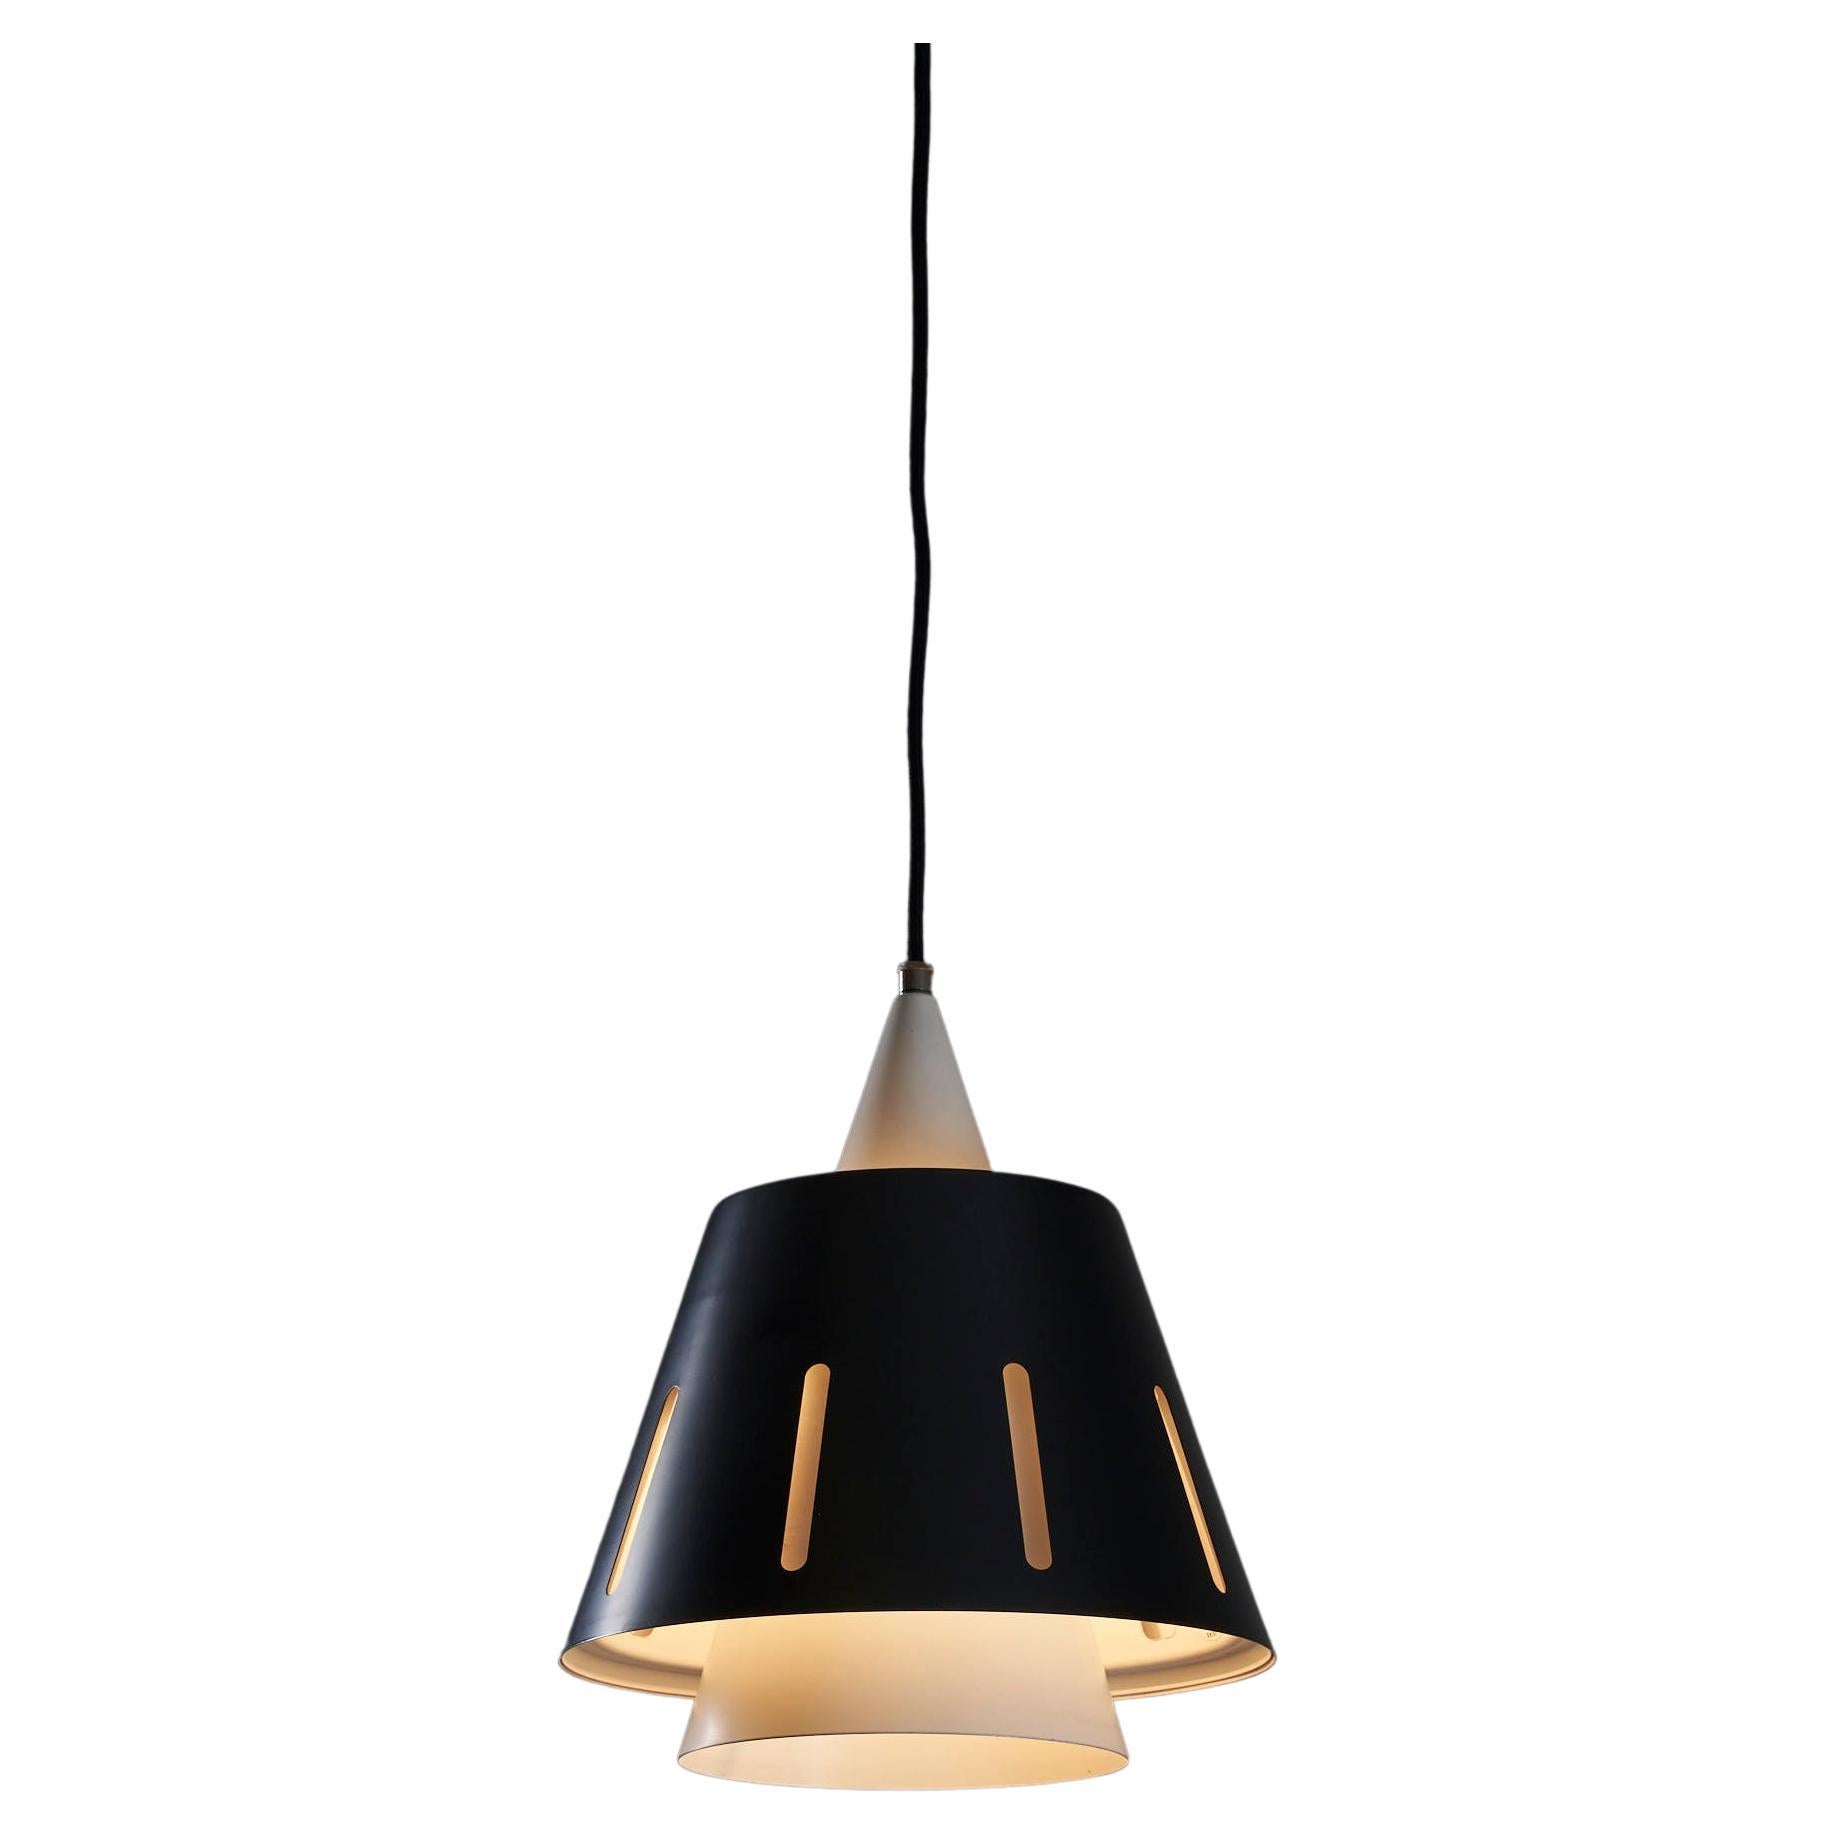 "n°10" Pendant By Busquet for Hala Zeist For Sale